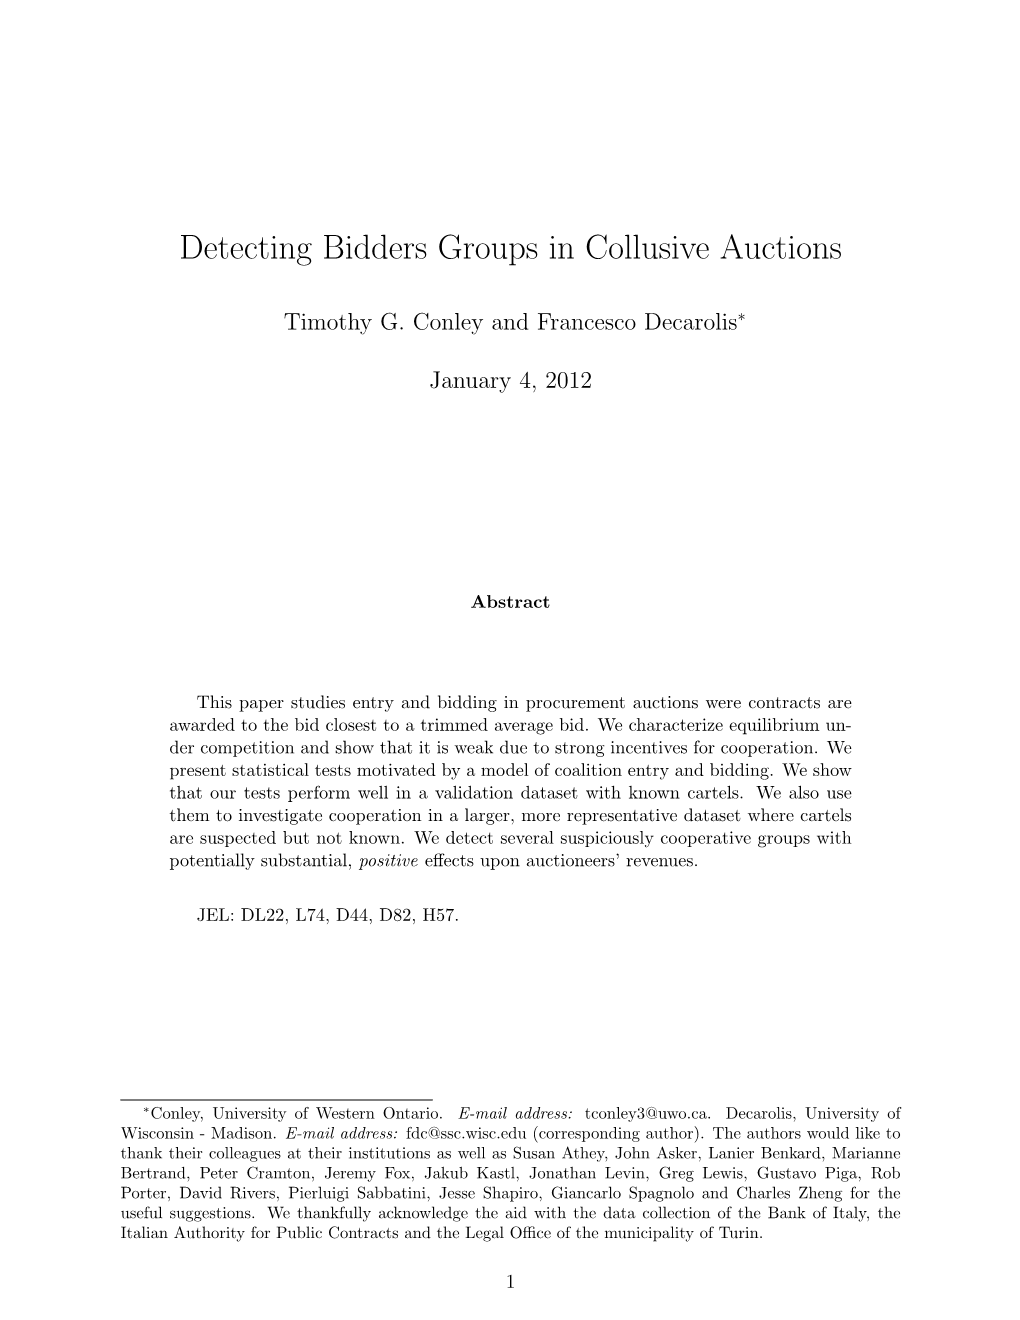 Detecting Bidders Groups in Collusive Auctions